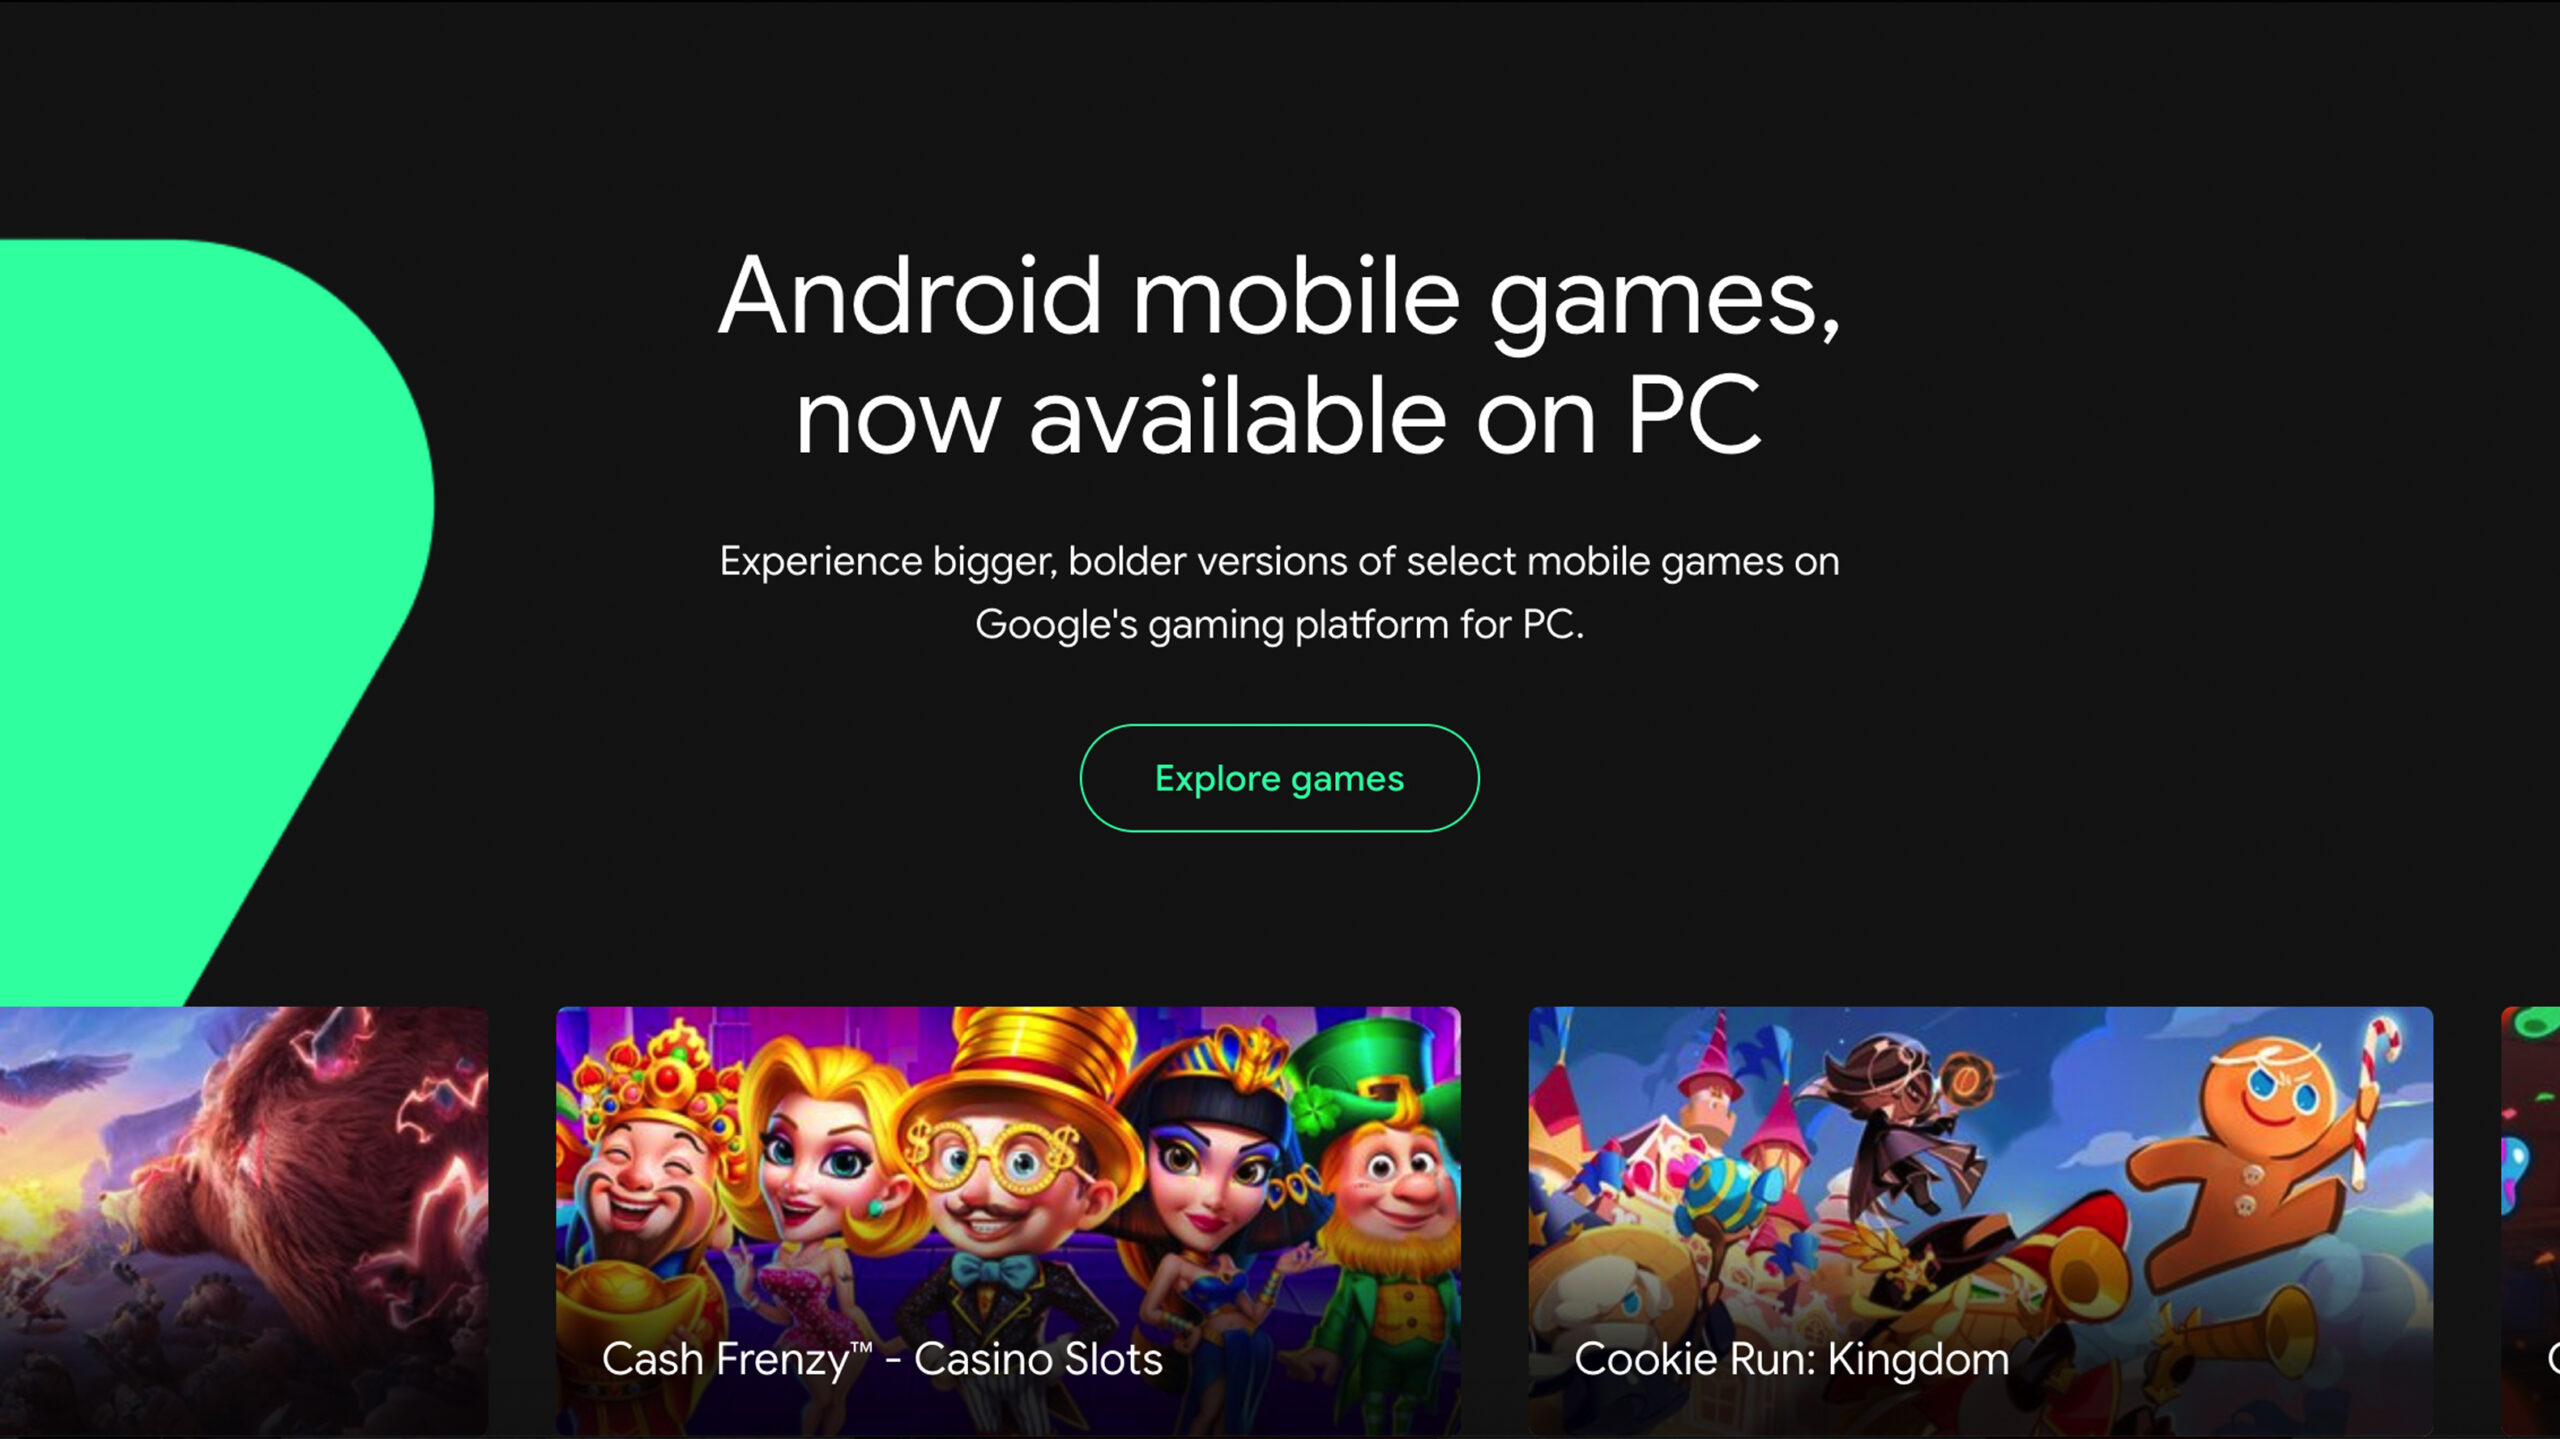 Google Play Games beta is now available (almost) everywhere